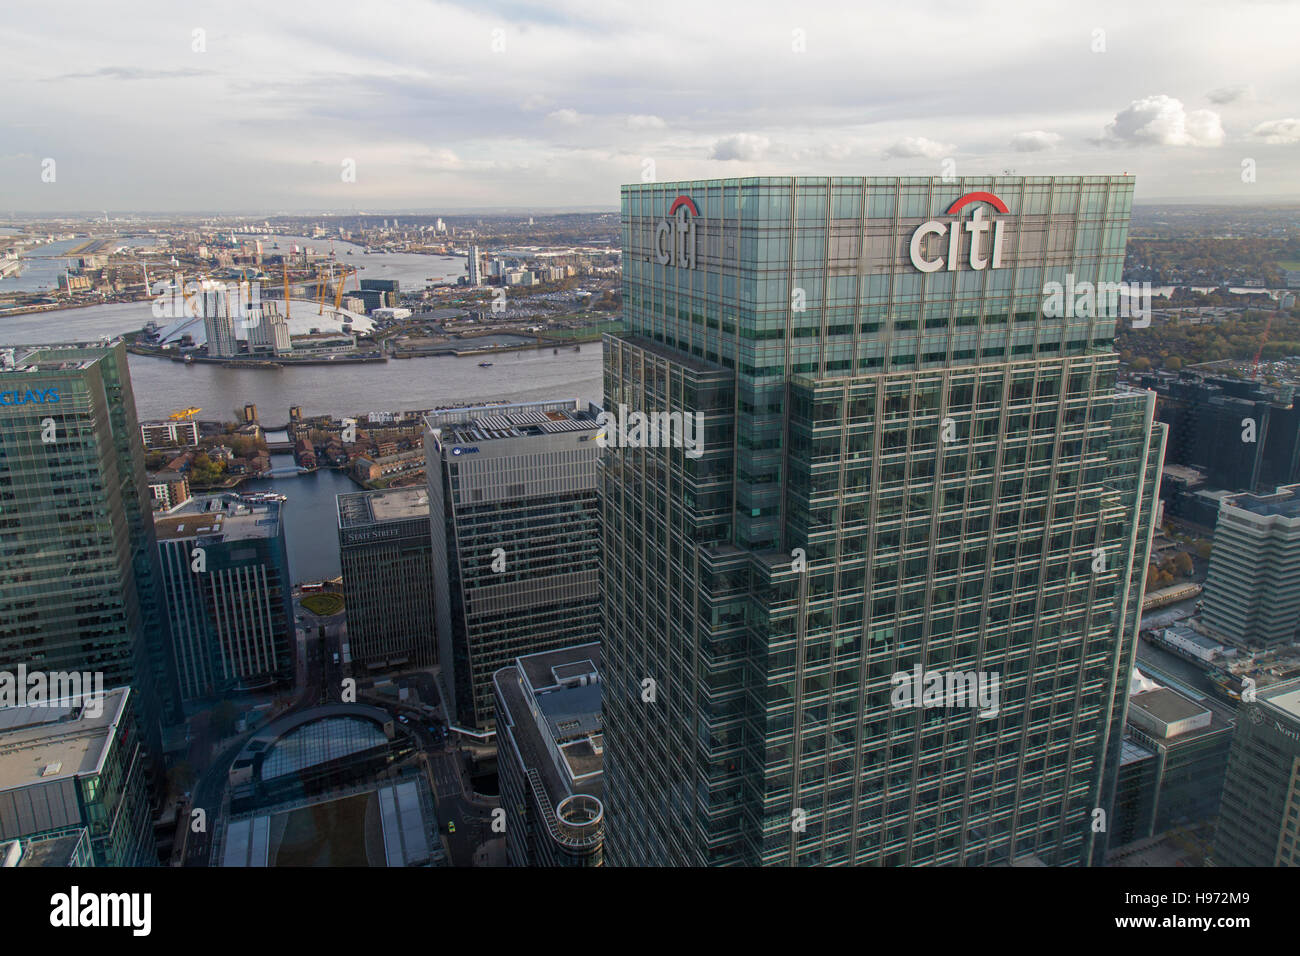 UK headquarters of CITI bank at 25 Canada Square, Canary Wharf, London, with the O2 arena and River Thames in the background. Stock Photo